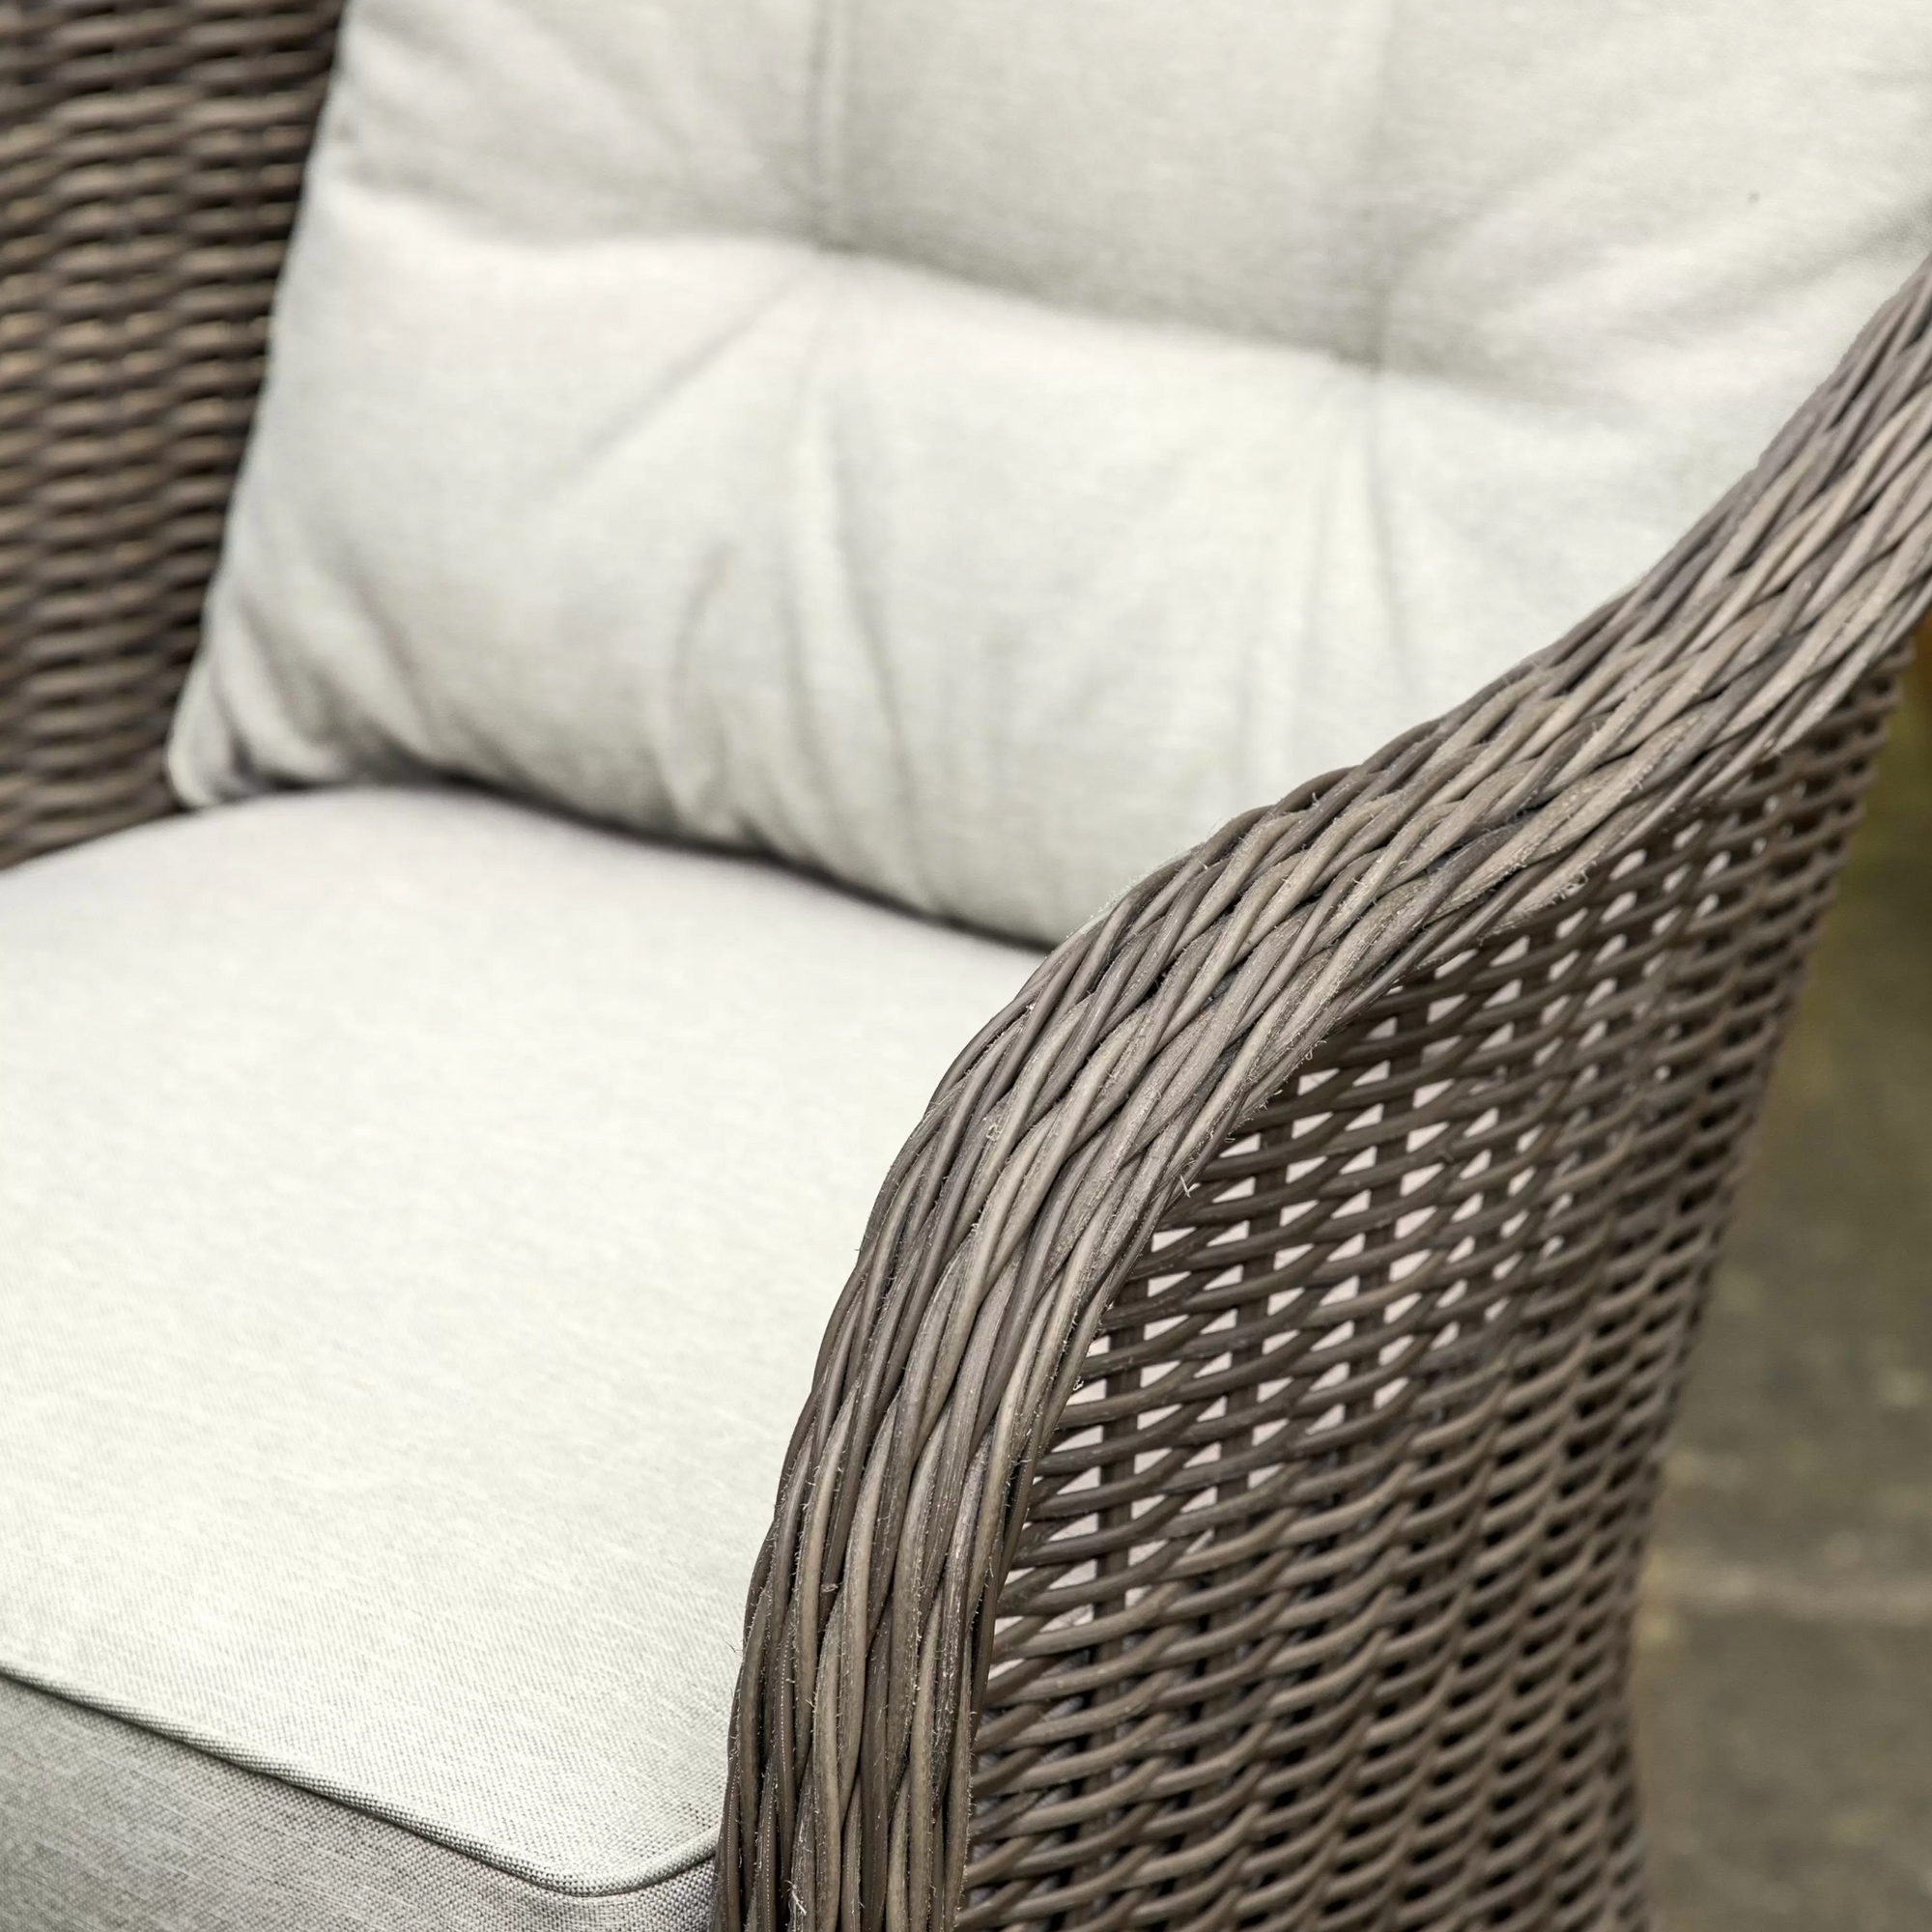 Close up image of a shower proof cushion on rattan chair.